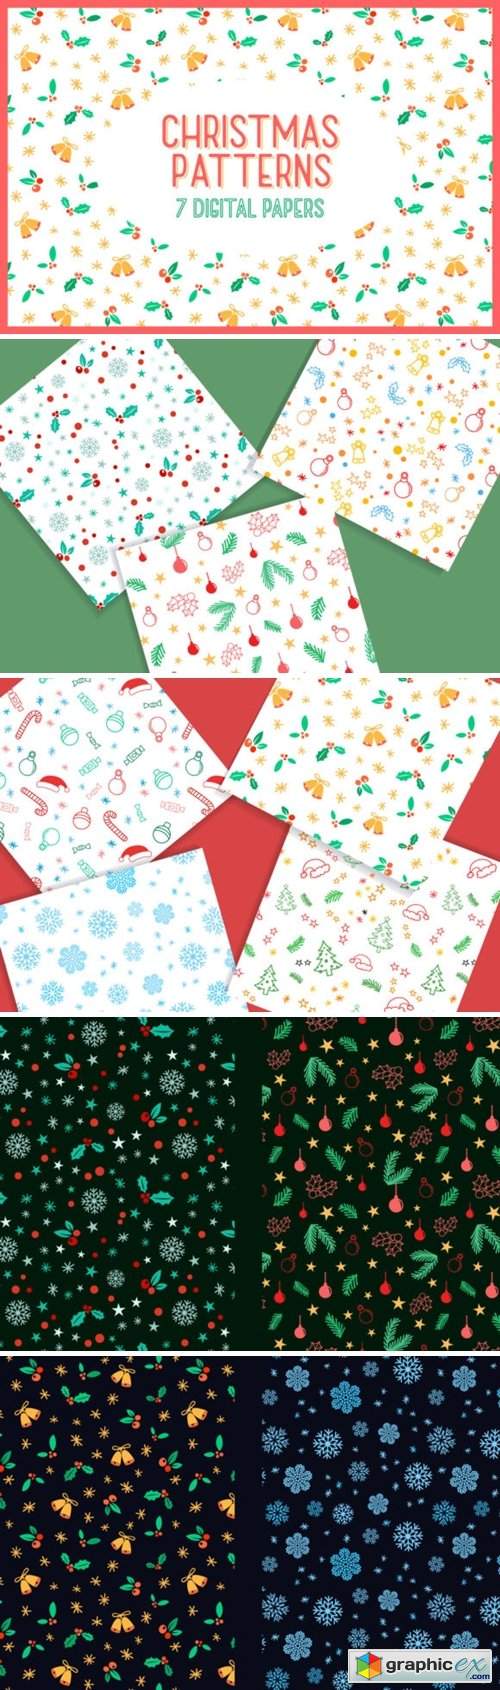  Christmas Patterns - 7 Digital Papers 